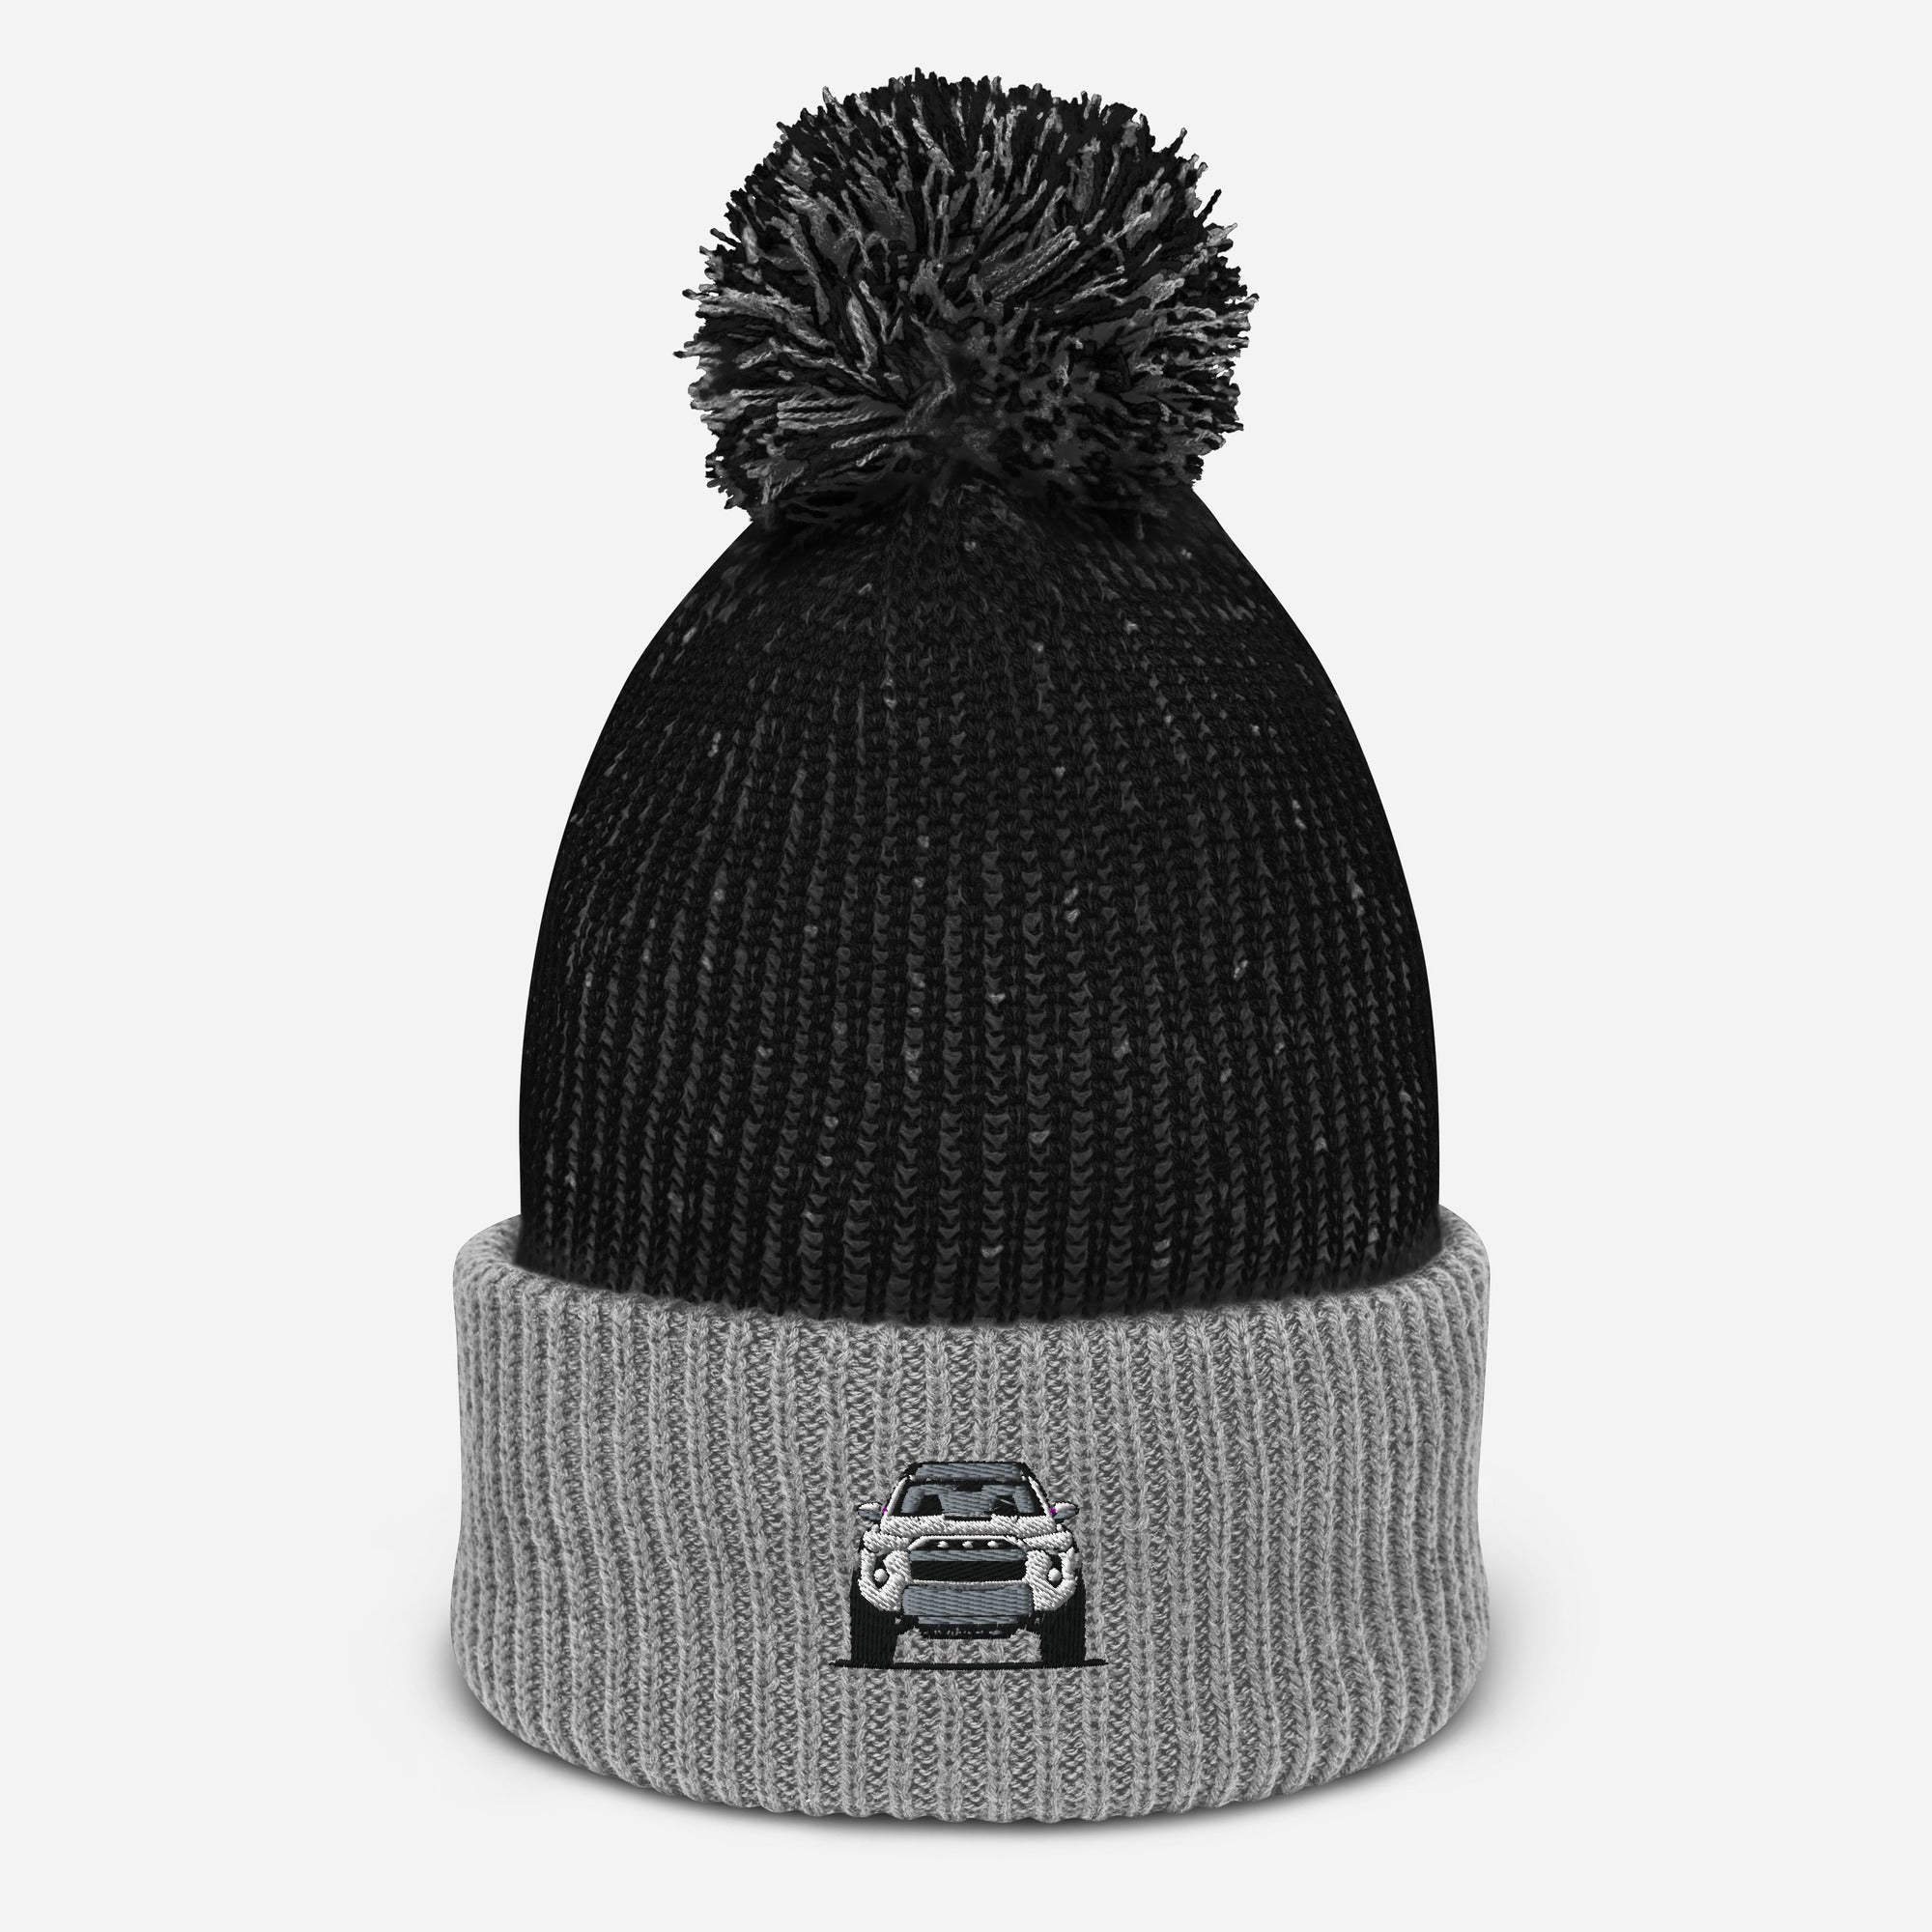 Tuques/Beanies